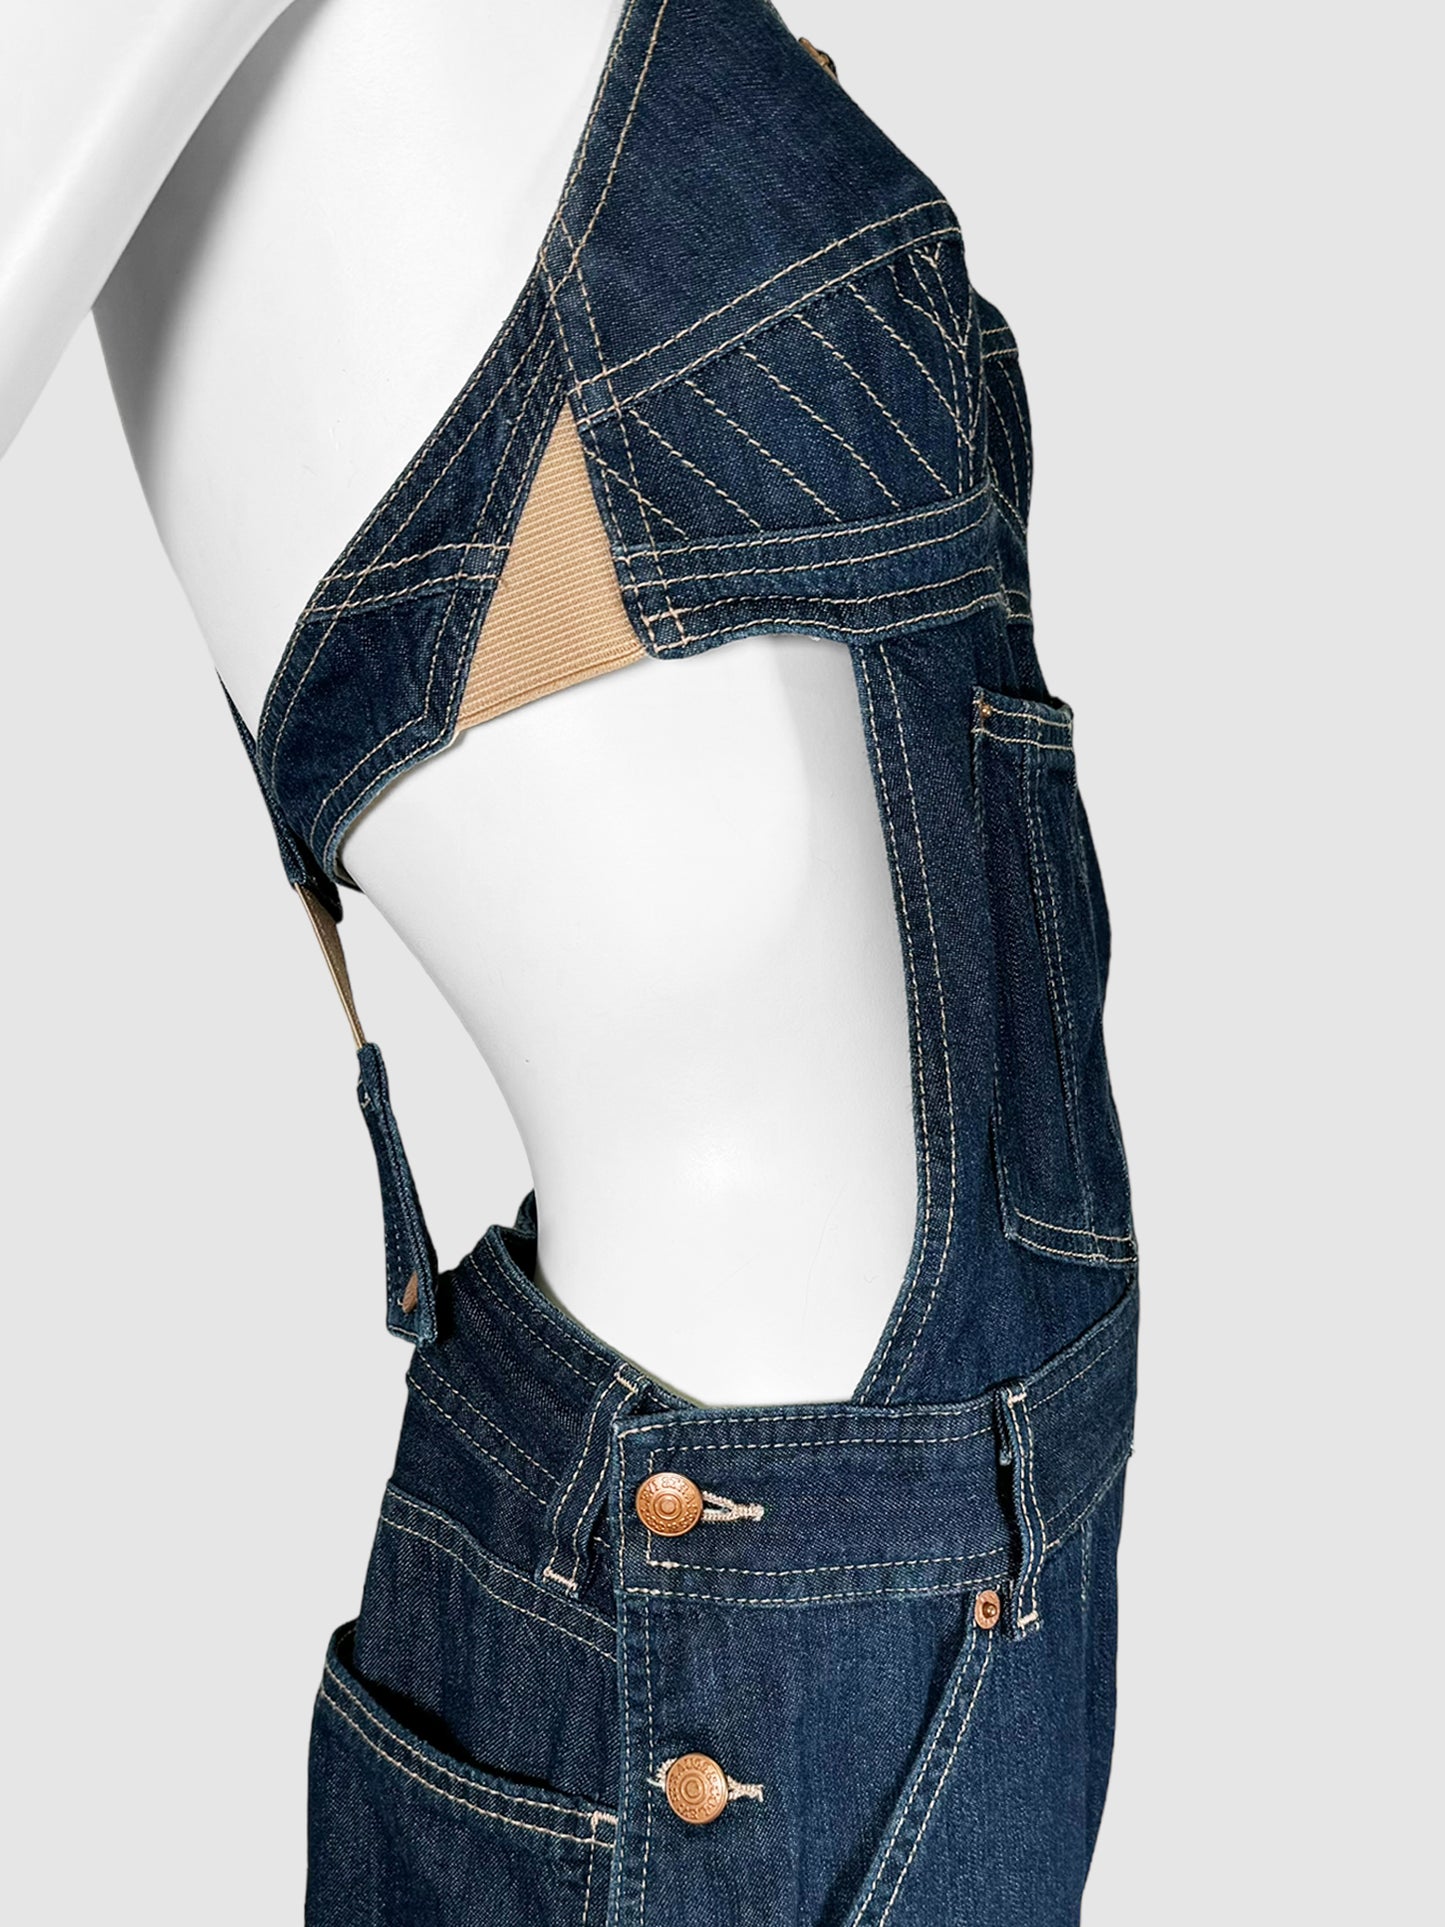 Denim with Contrast Stitching Overalls - Size L